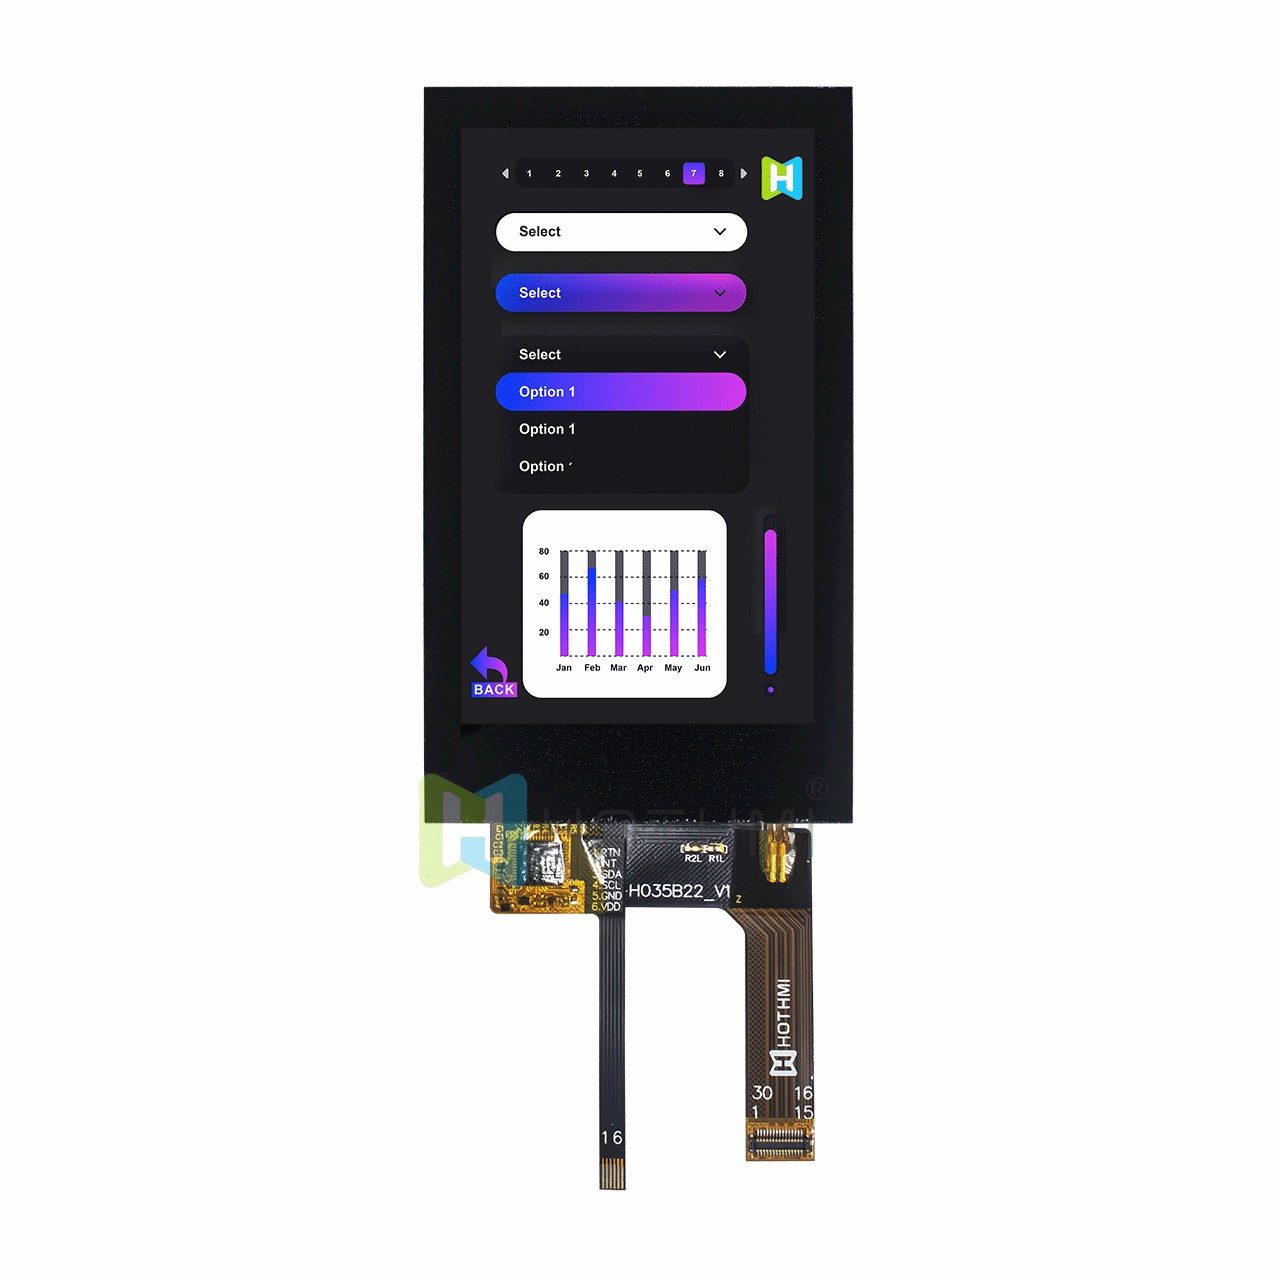 IPS 3.5-inch TFT LCD display module/480x800 pixels/ST7701S/capacitive touch/MIPI interface/3.3V/compatible with Android